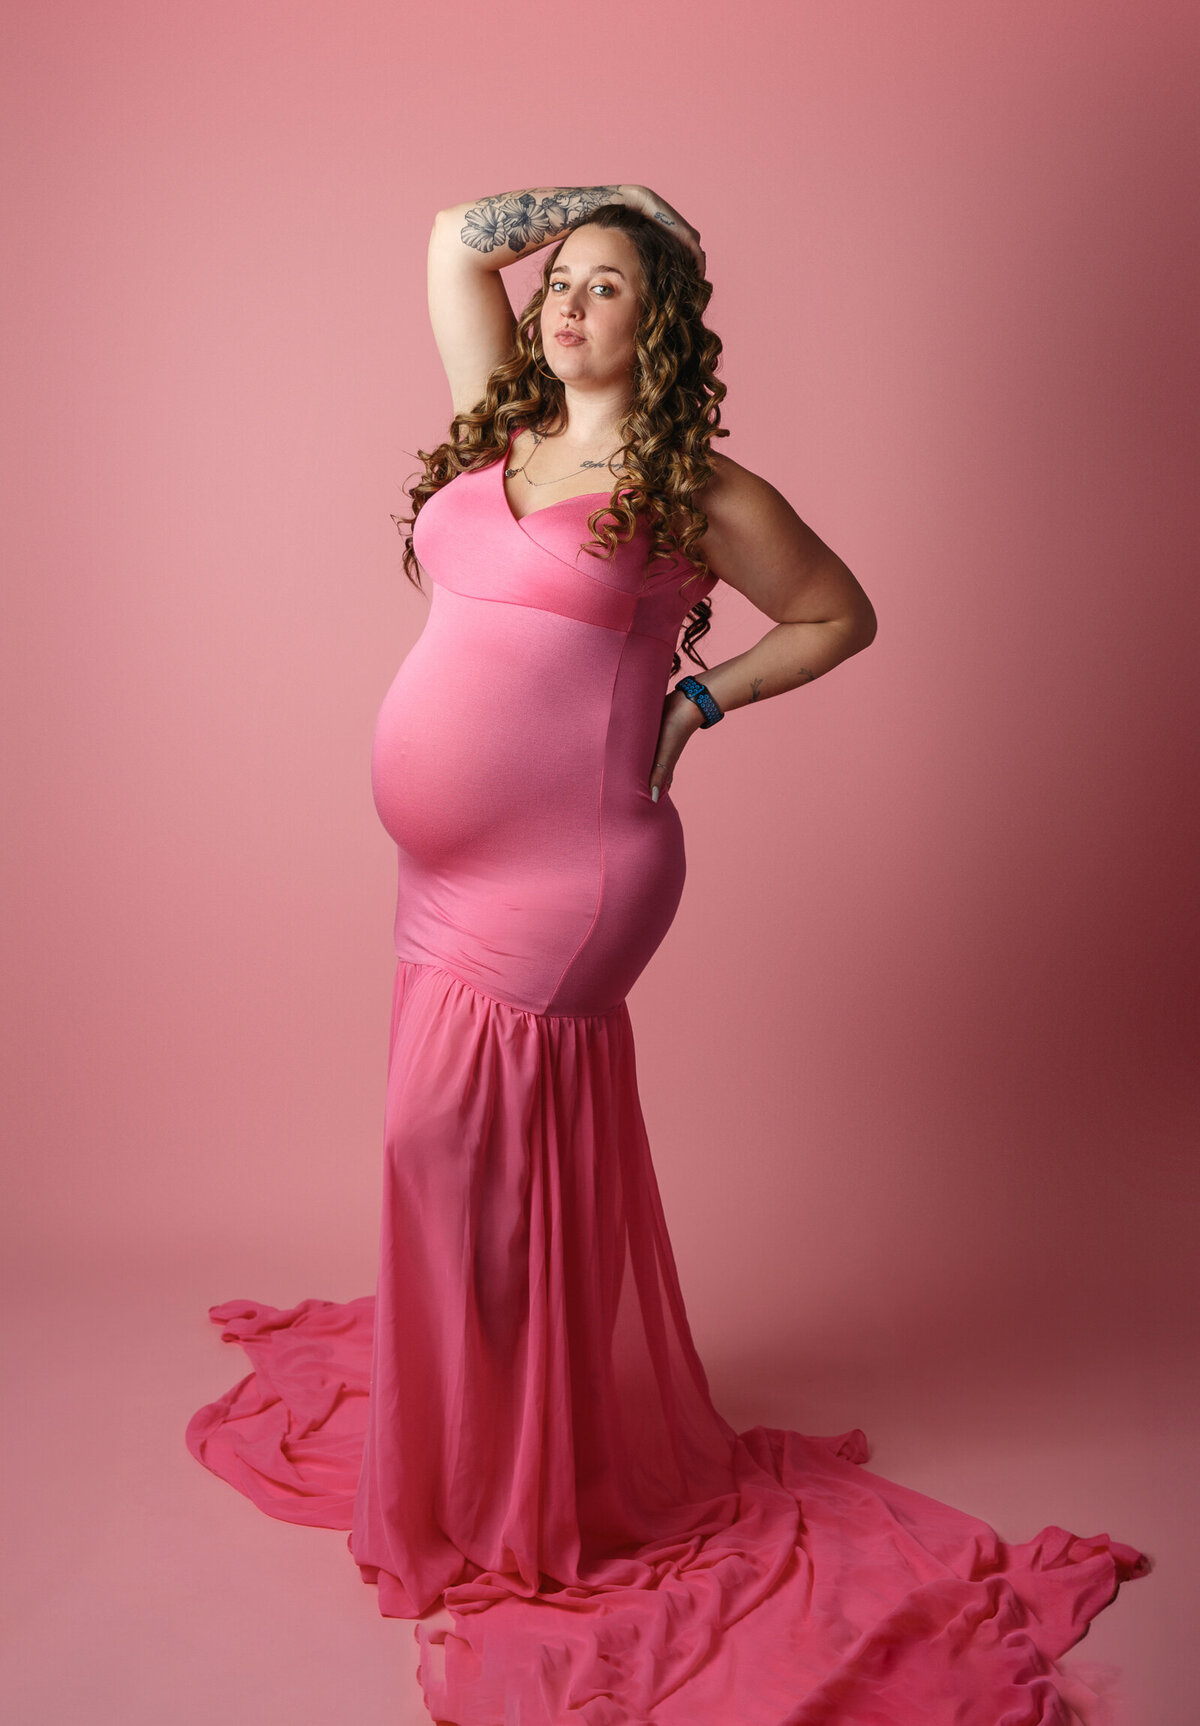 Pretty pregnant woman wearing a pink gown and photographed on a pink background